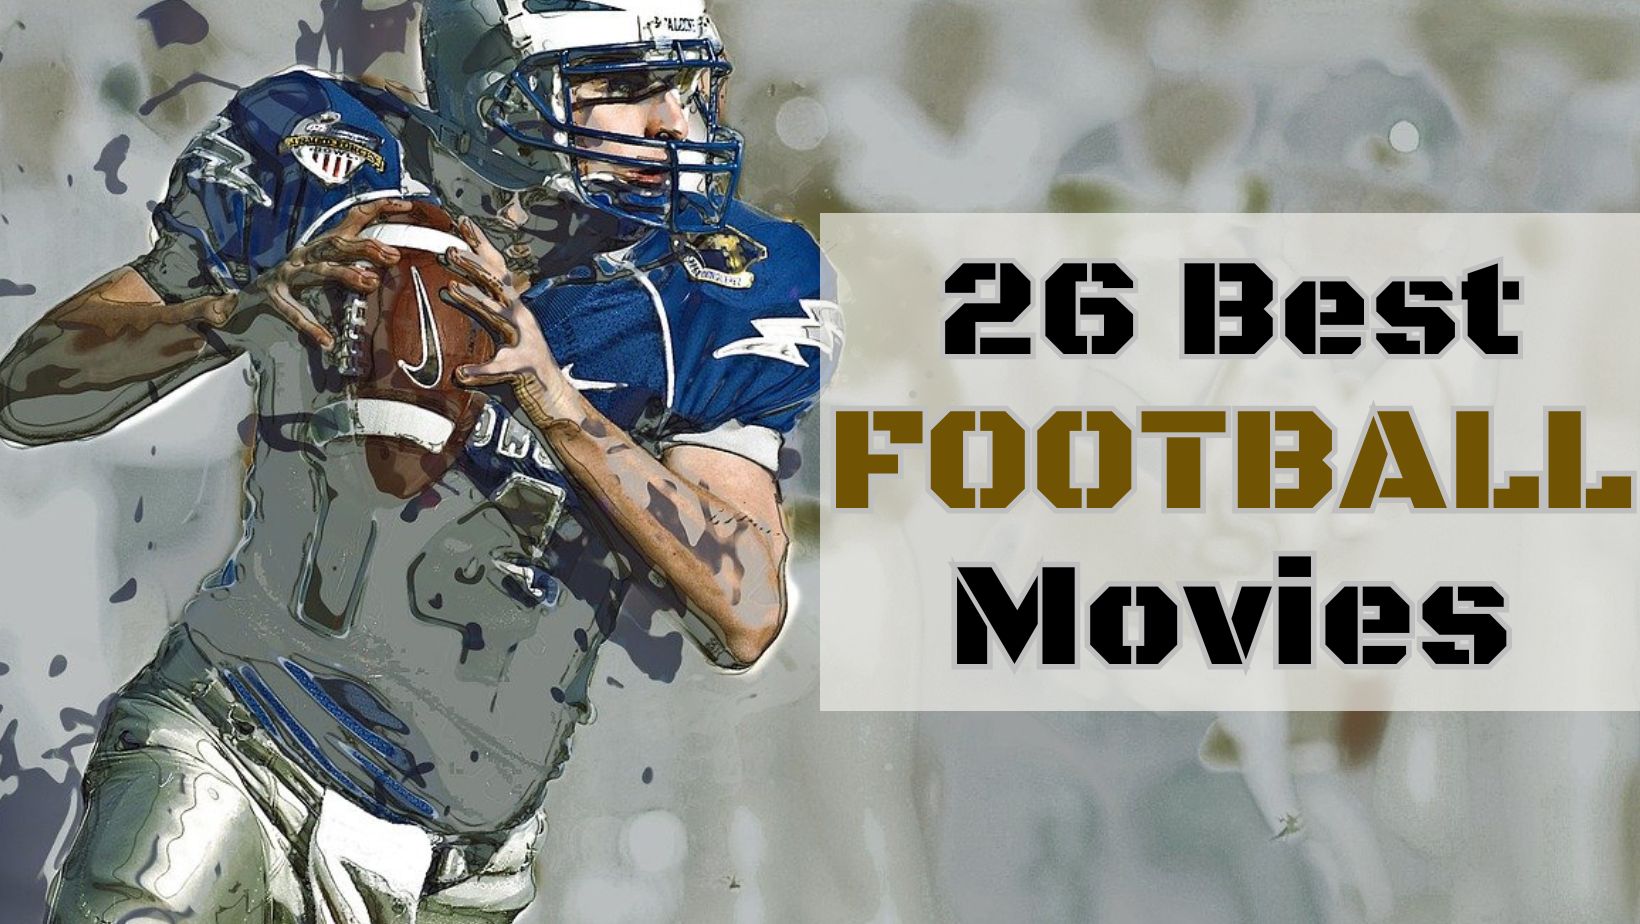 image of quarterback holding footbal. hes wearing a blue and white uniform. text "26 best football movies"